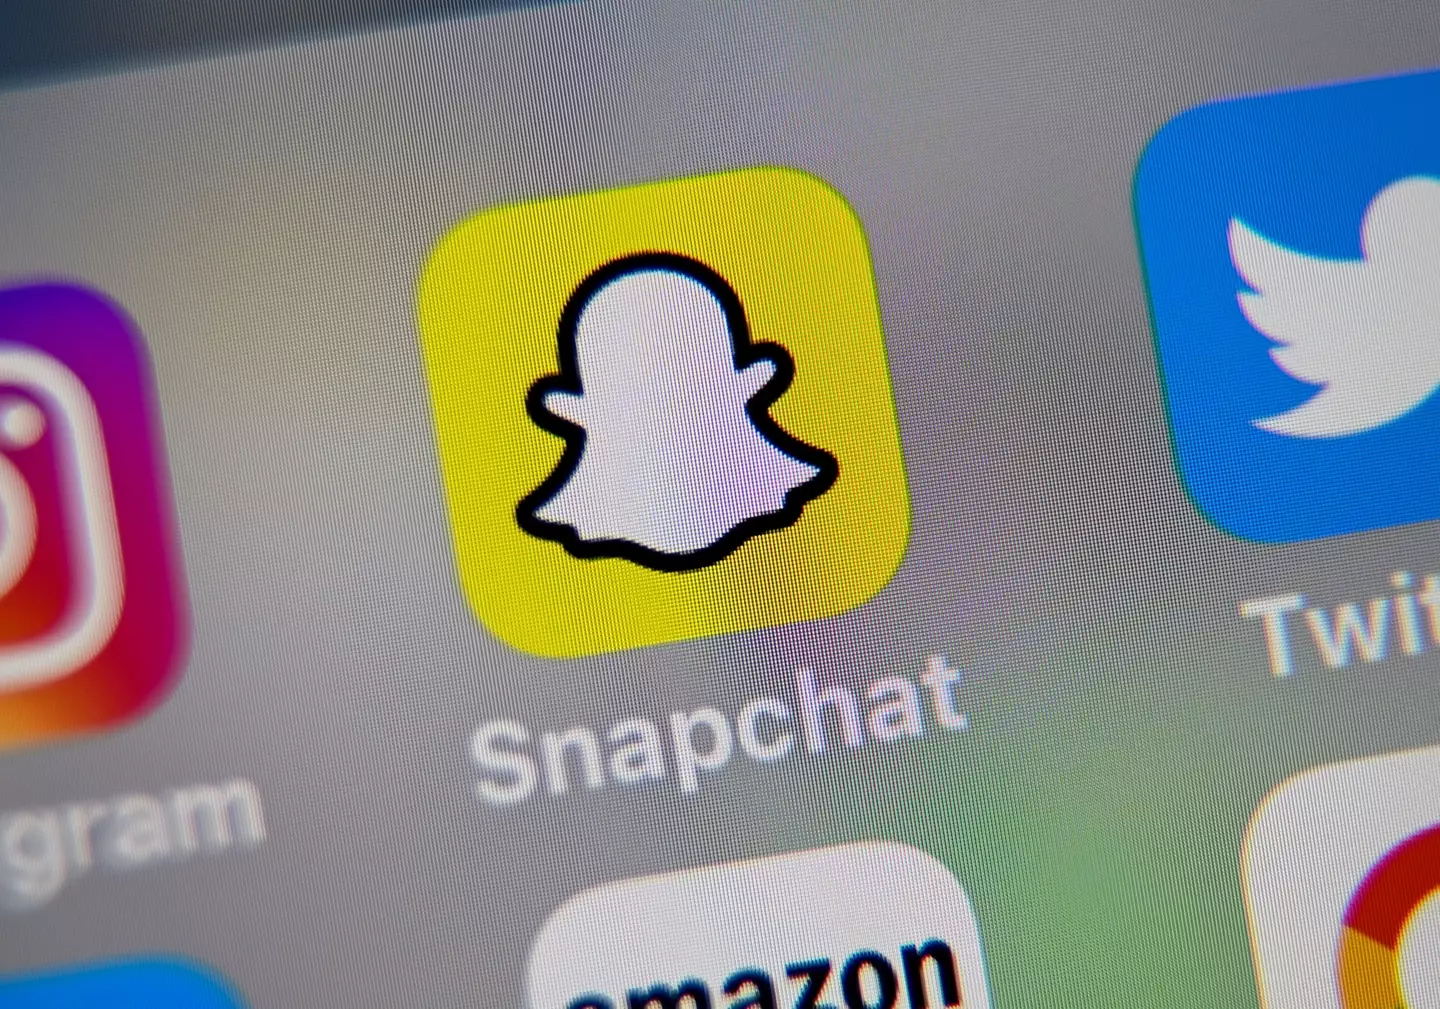 Snapchat has its own AI users can chat to.